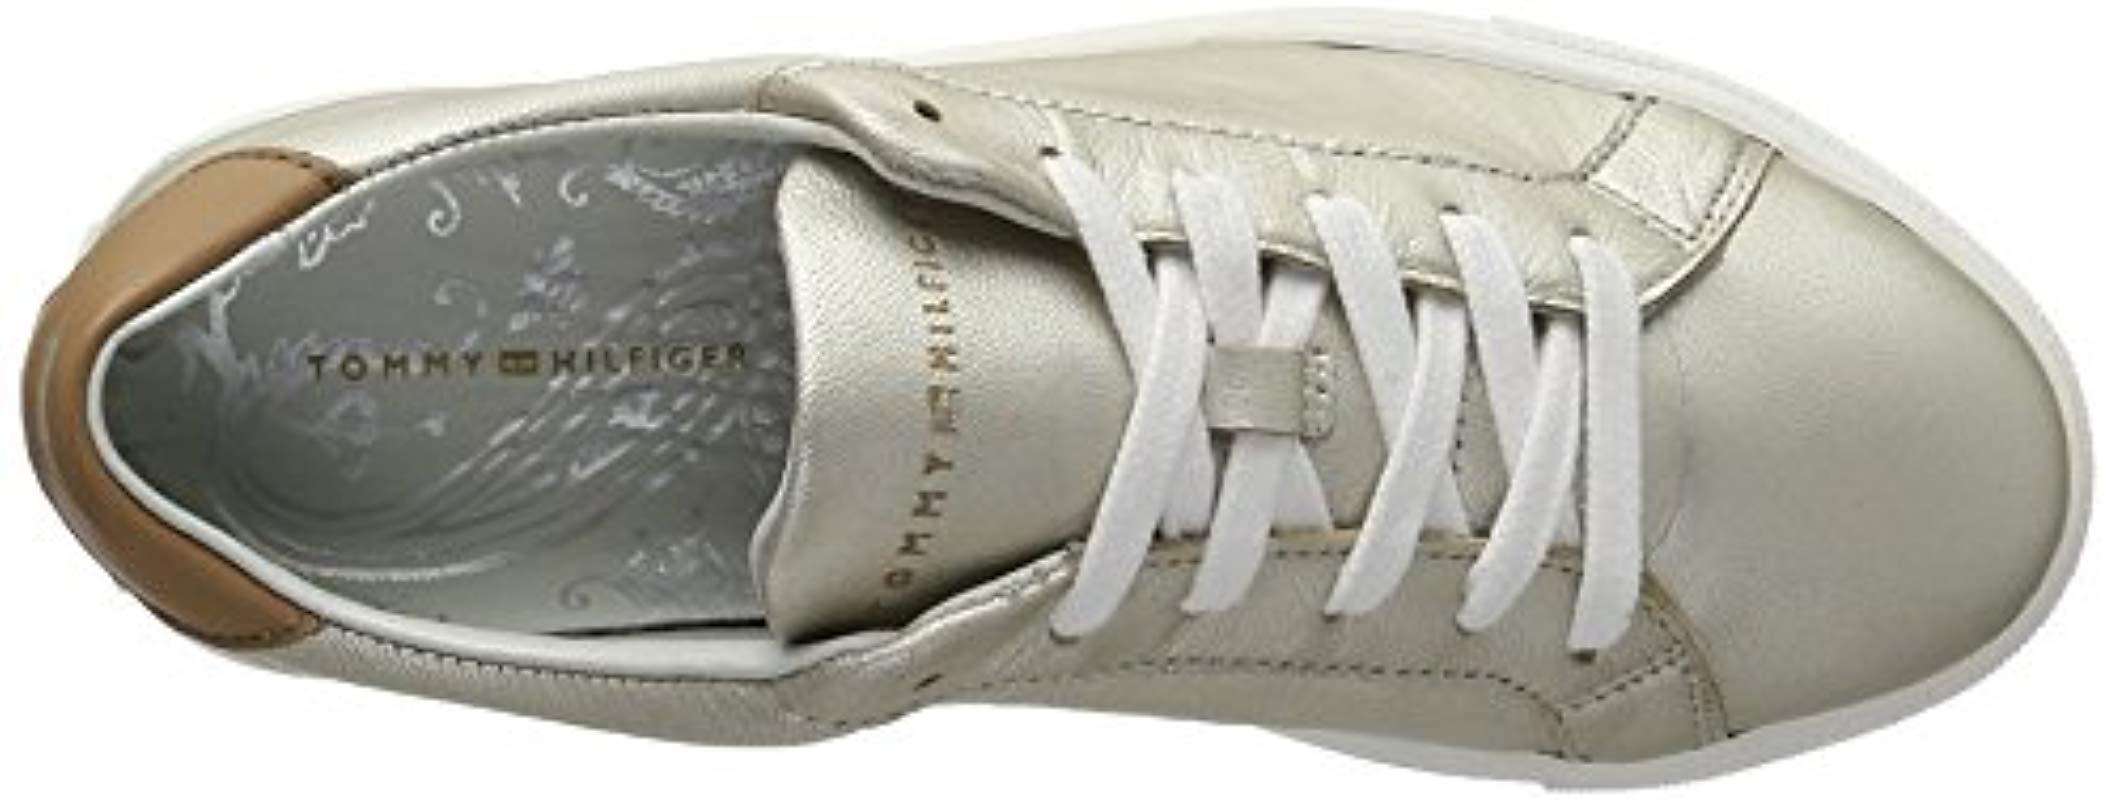 Tommy Hilfiger 's T1285ina 10a2 Trainers Silver Grey in Metallic - Lyst